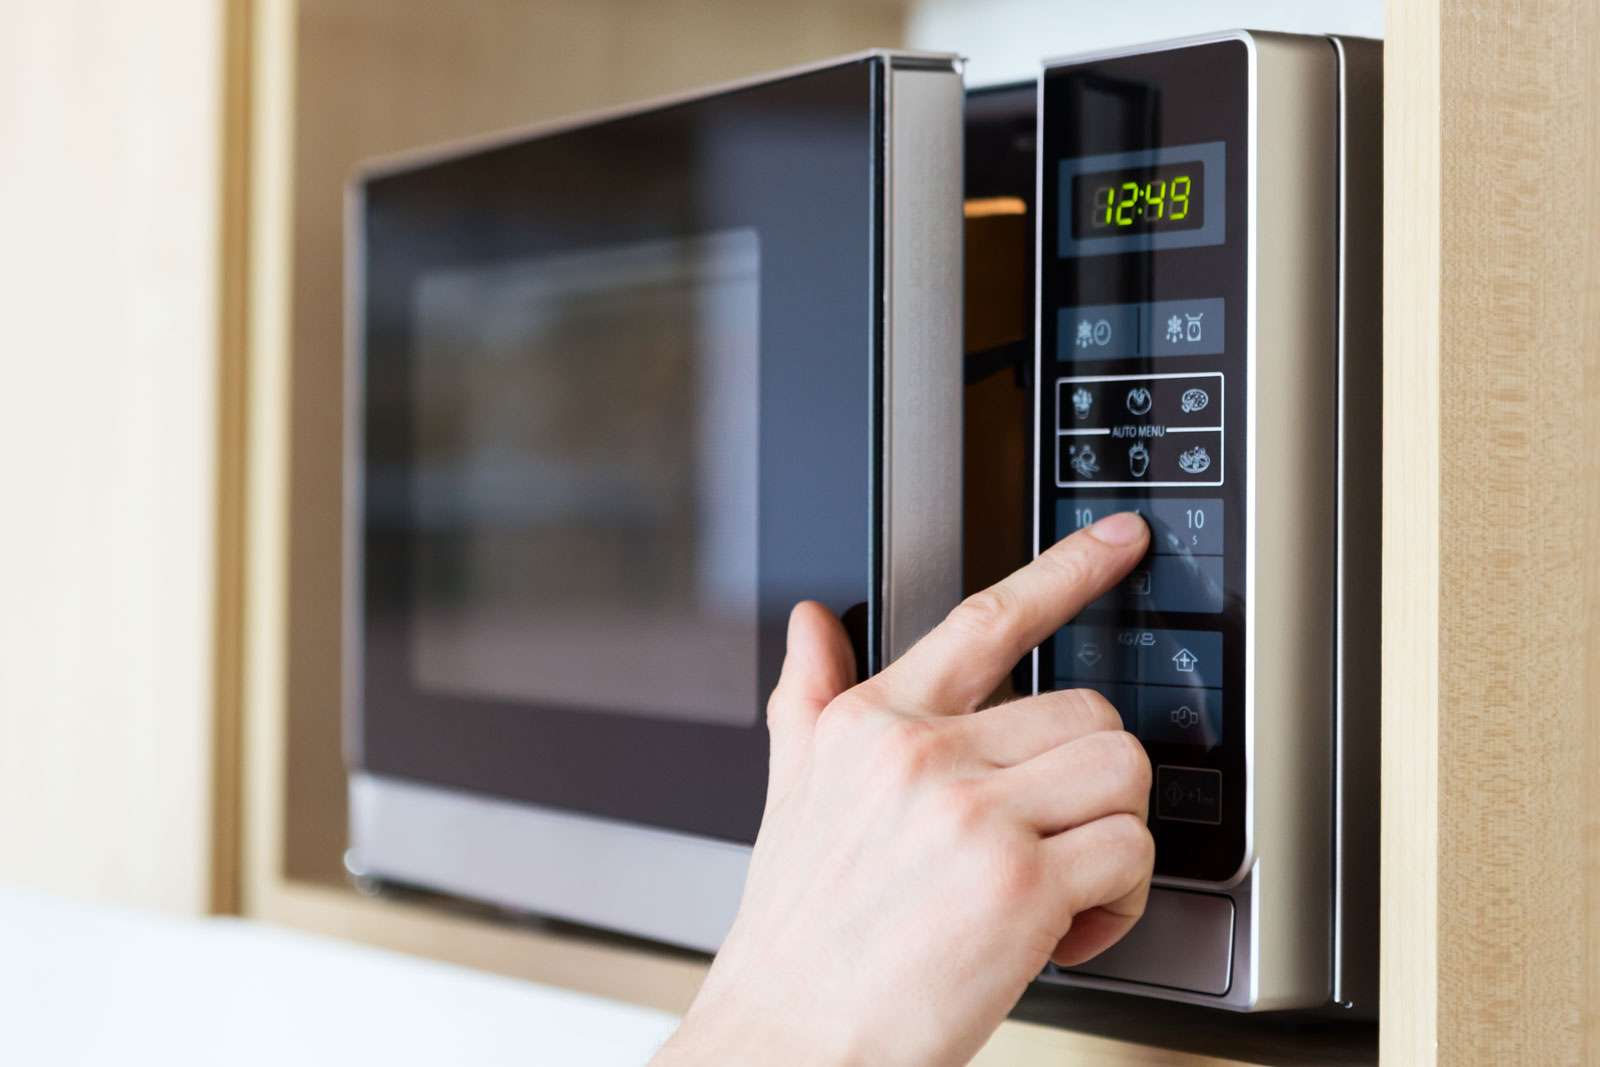 What Are Microwaves Lined With? Can You Use Antique Microwaves?